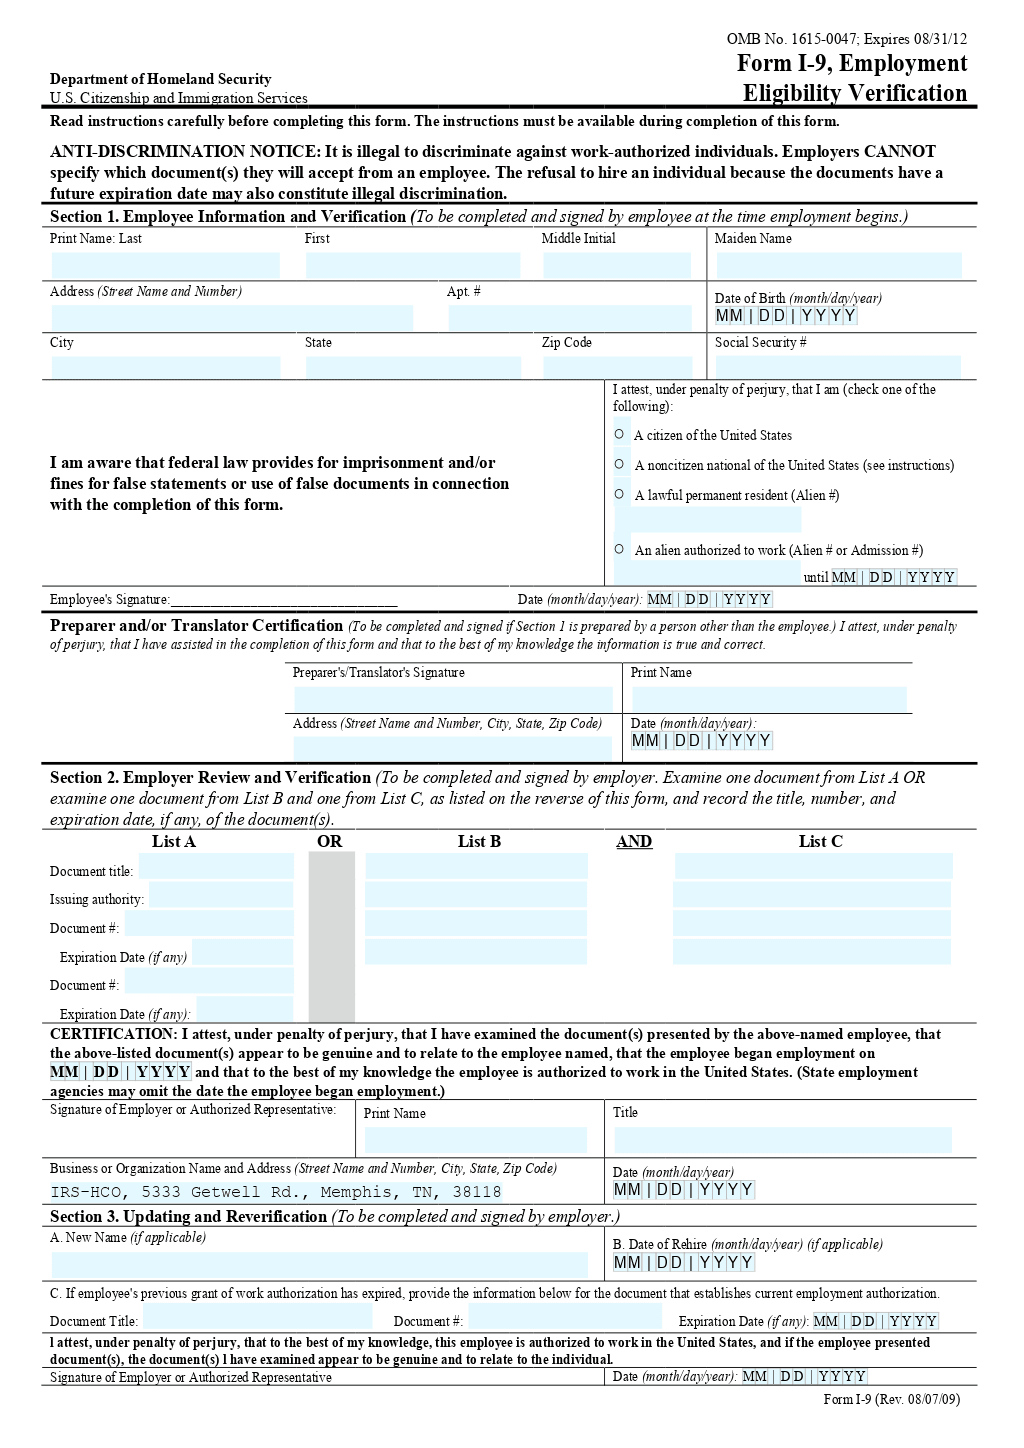 Employment Eligibility Verification Form (I-9) Template within Irs I9 Form